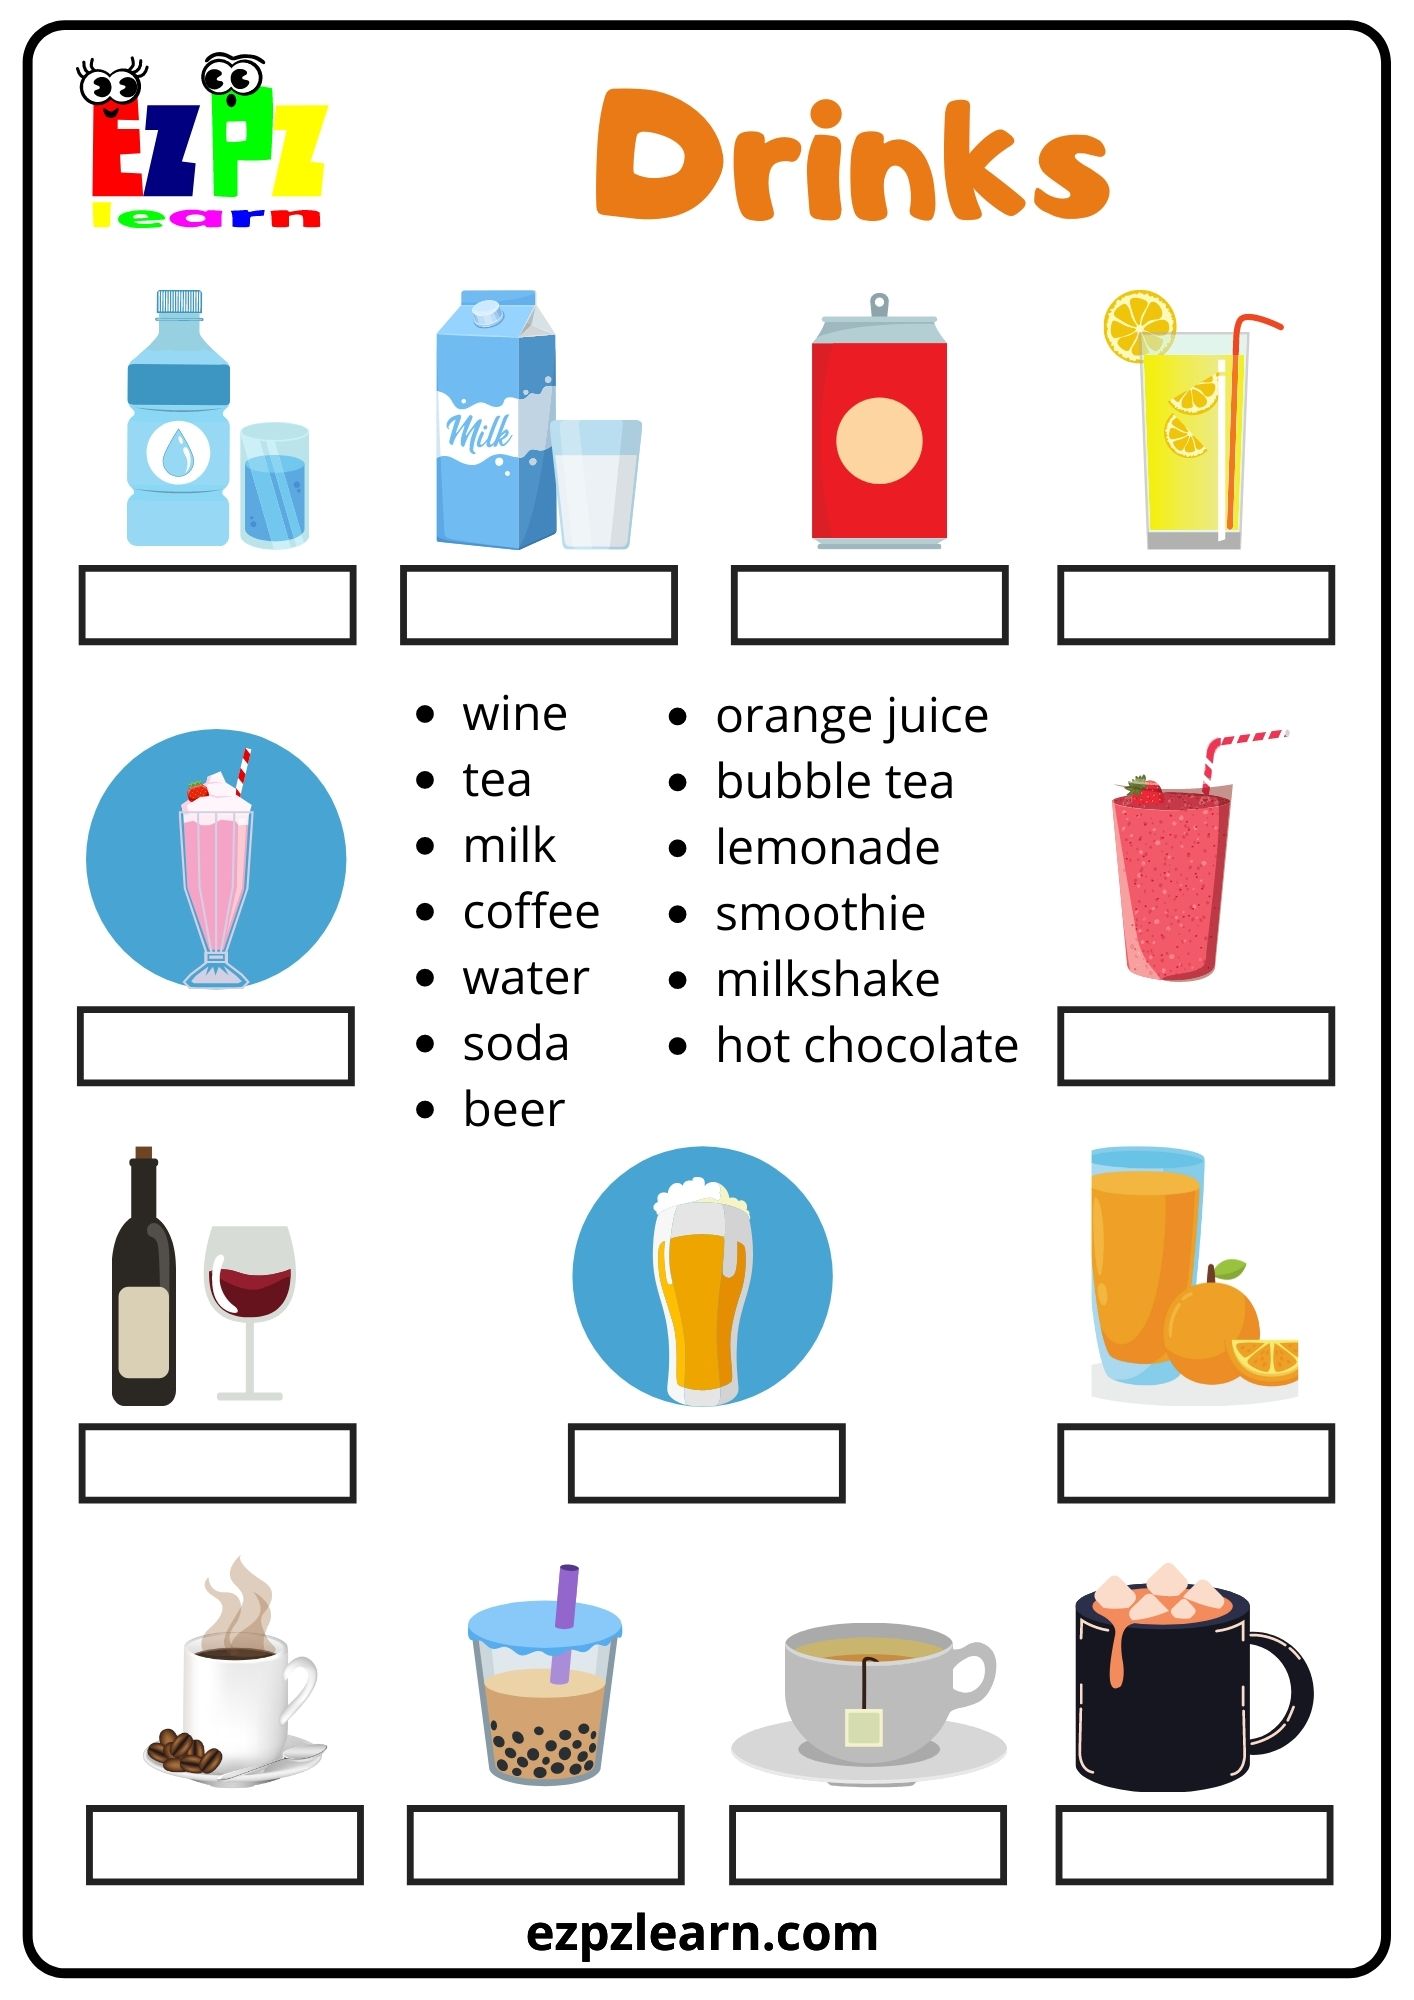 Еда и напитки на английском. Drinks in English for Kids. Food and Drinks Vocabulary. Drinks worksheets